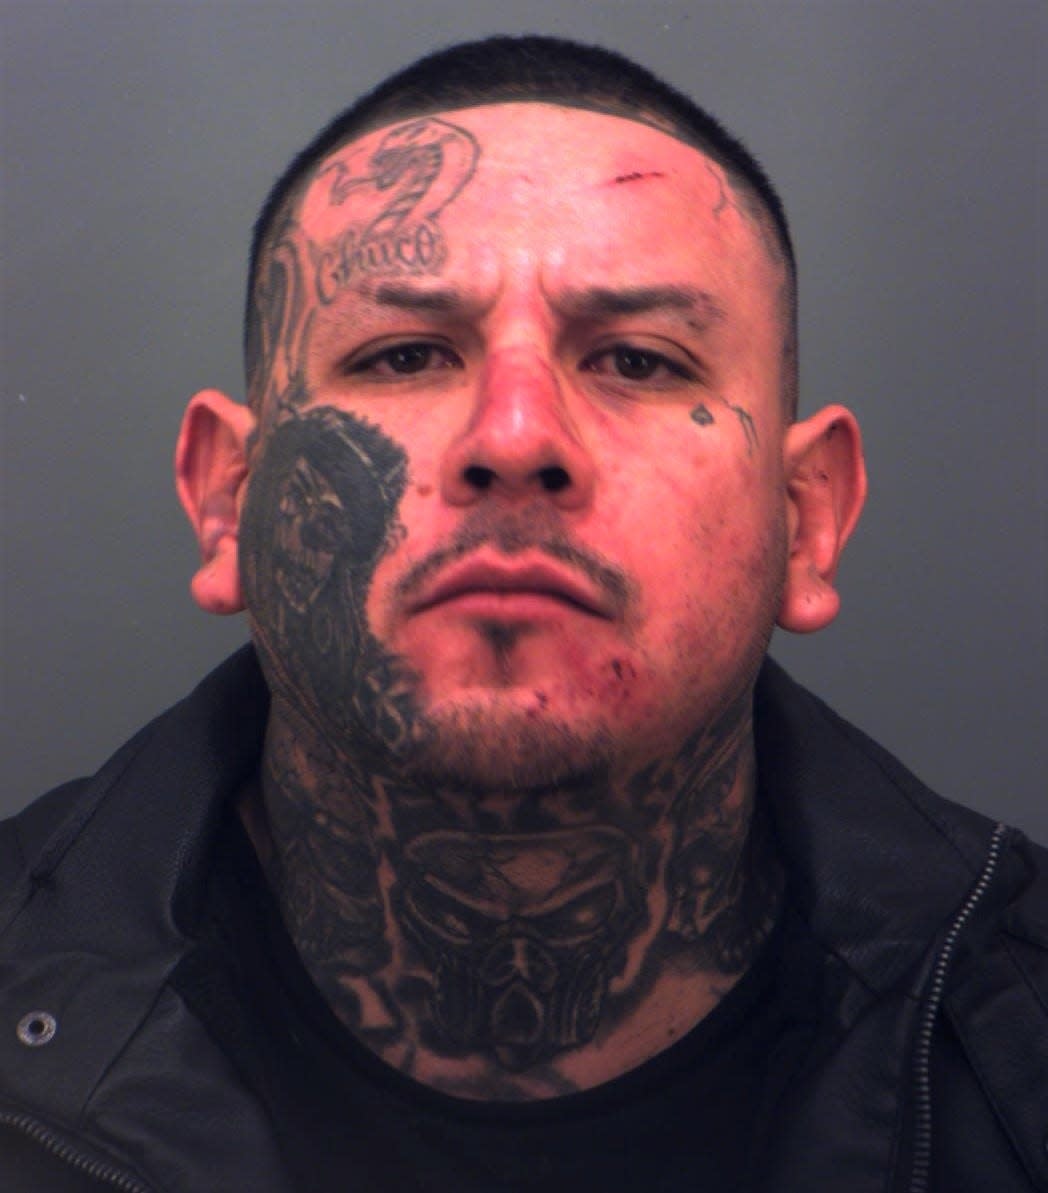 Julio Cesar Perez, 33, was arrested on two outstanding warrants for probation violation on an aggravated assault on a peace officer charge, authorities said.